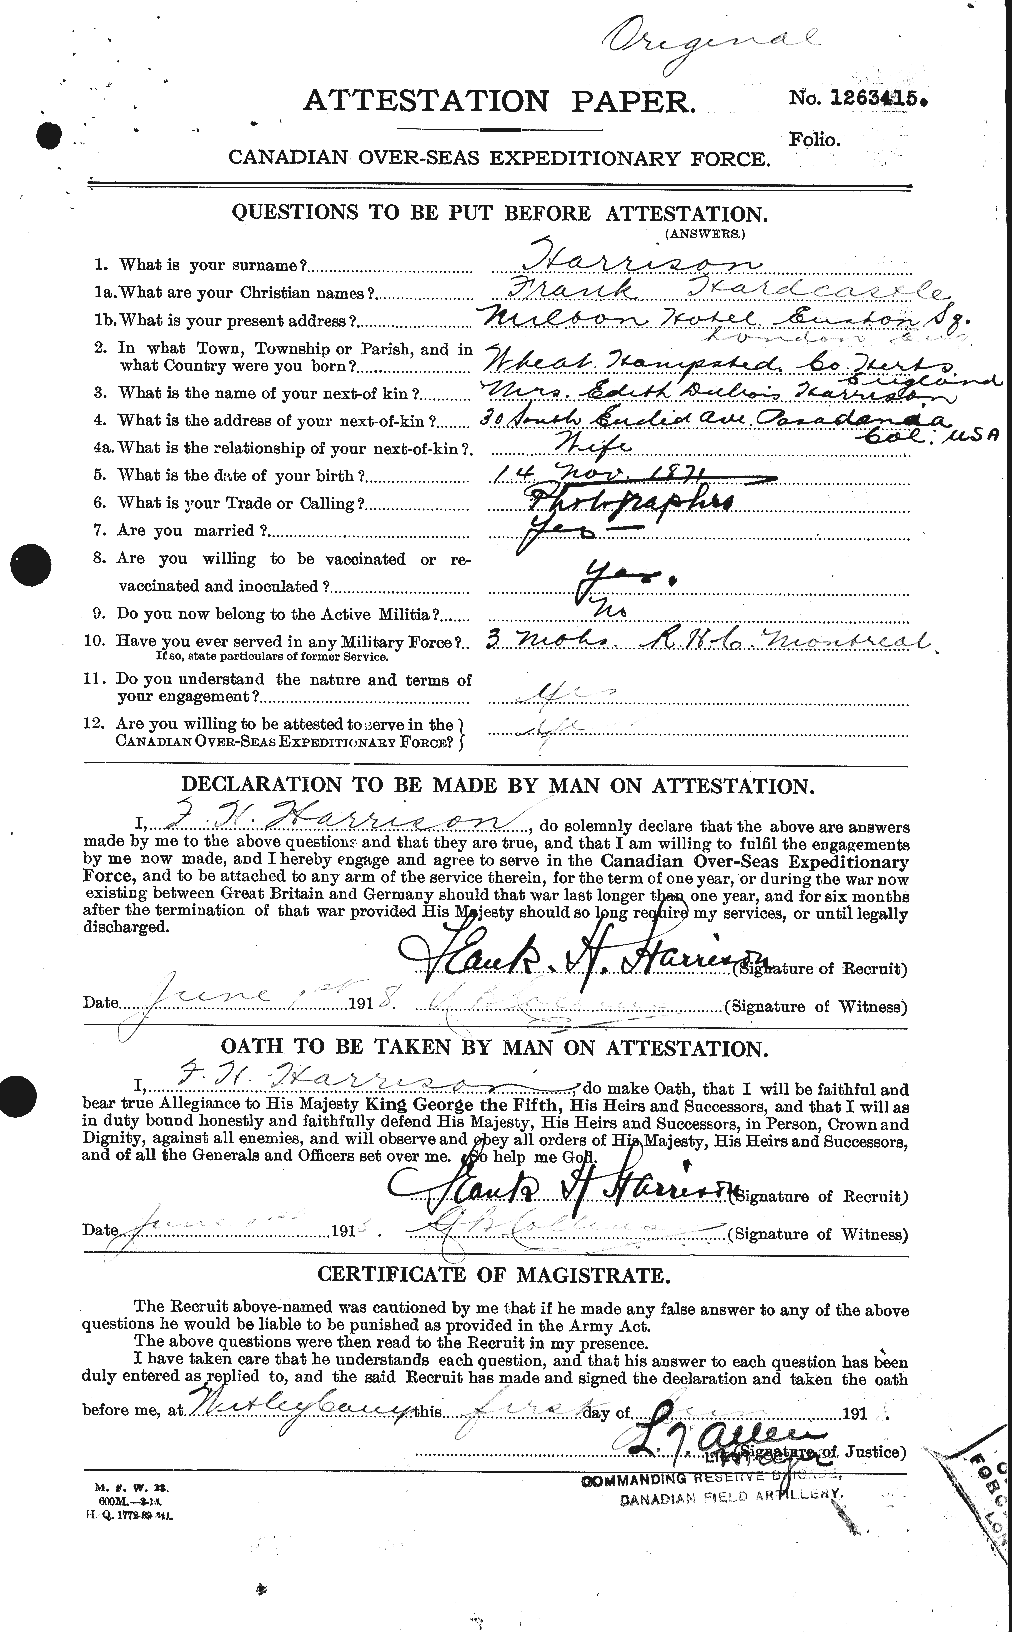 Personnel Records of the First World War - CEF 380388a